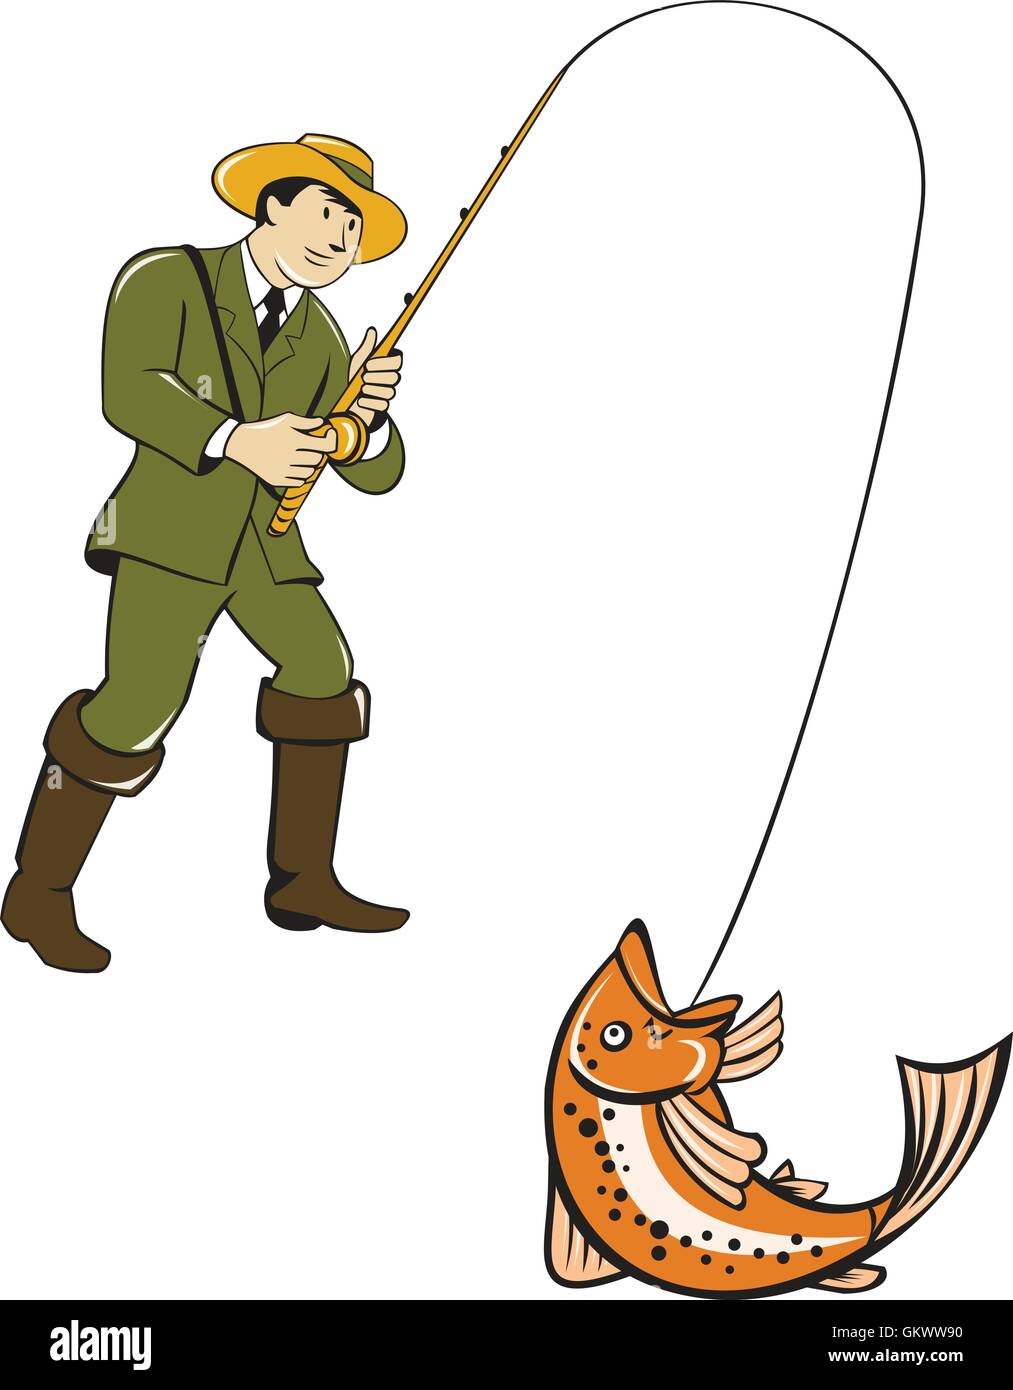 Fly Fisherman Catching Trout Fish Cartoon Stock Vector Image & Art